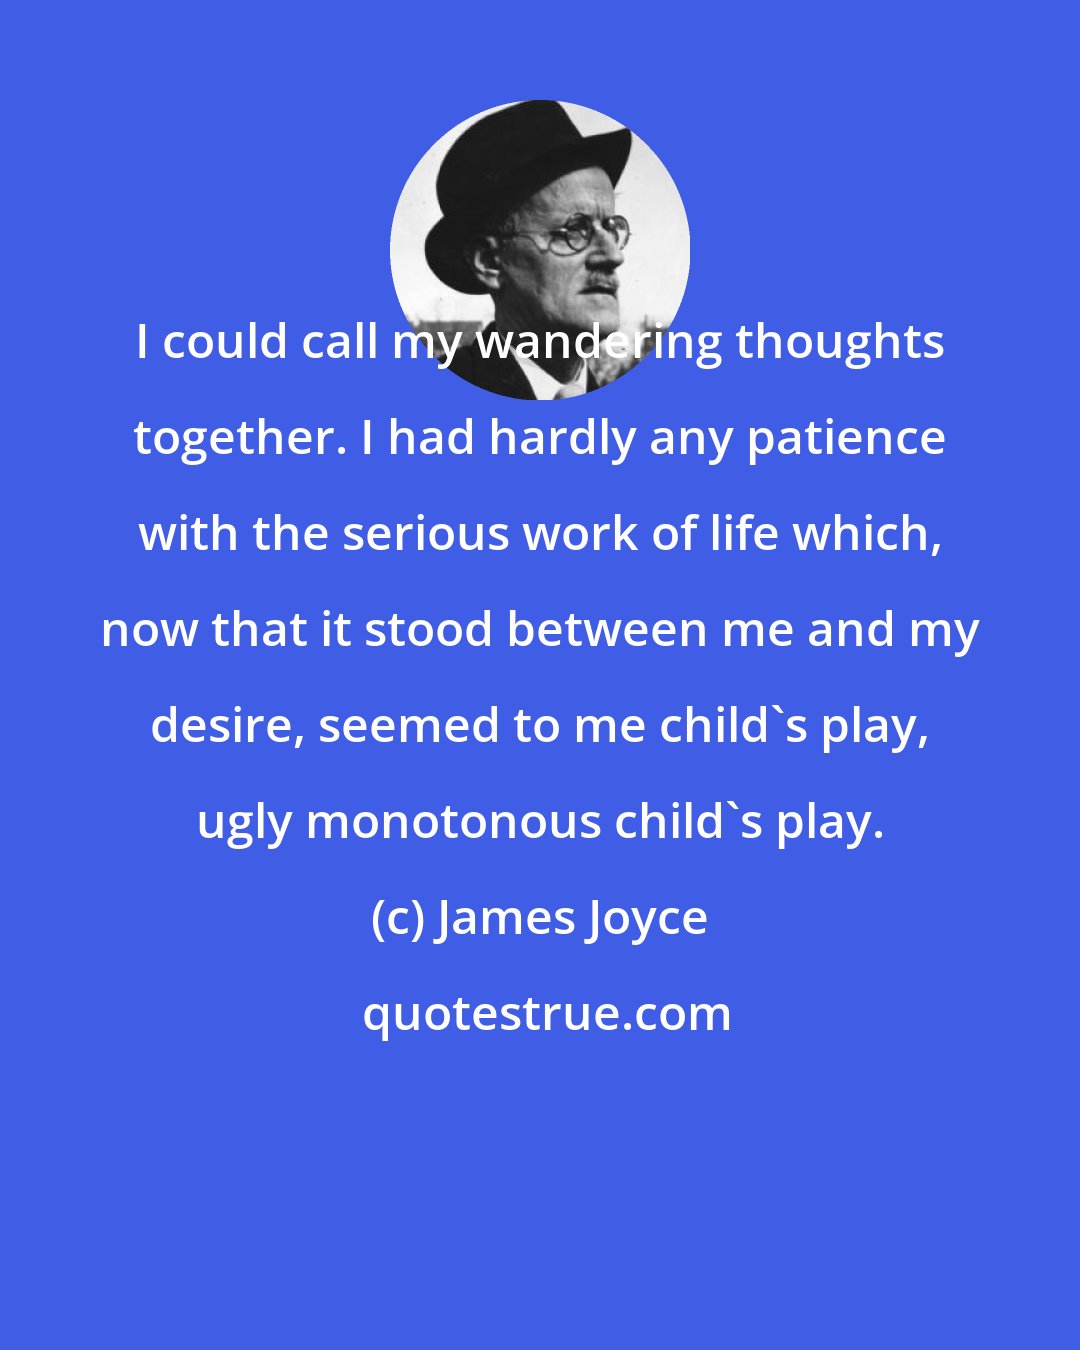 James Joyce: I could call my wandering thoughts together. I had hardly any patience with the serious work of life which, now that it stood between me and my desire, seemed to me child's play, ugly monotonous child's play.